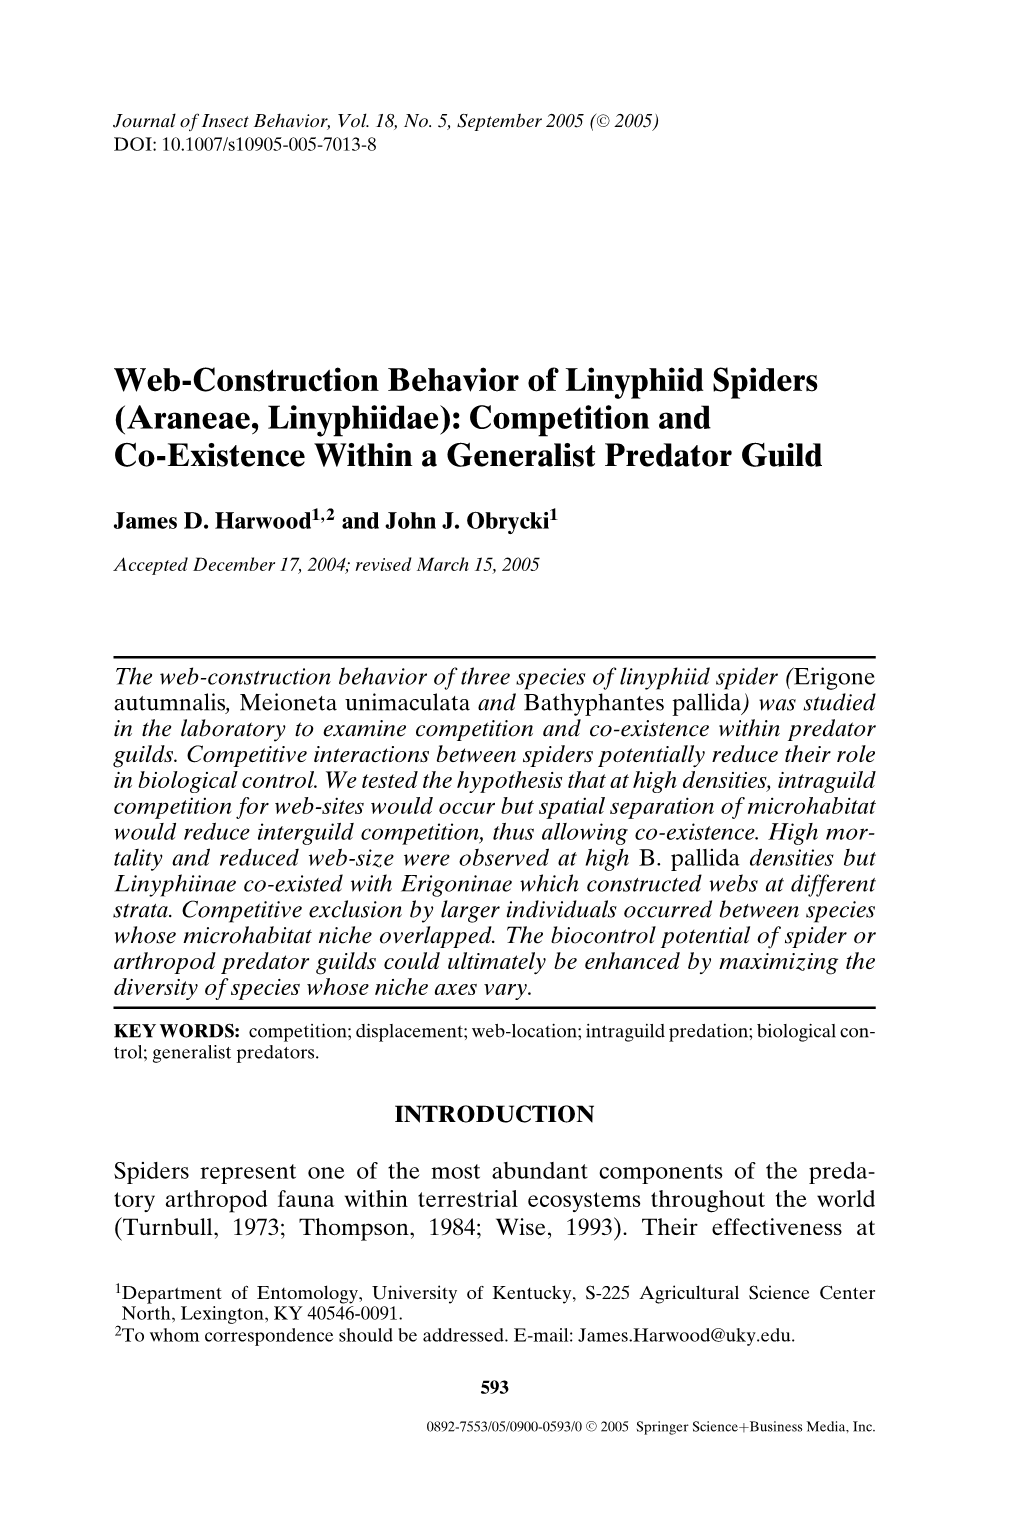 Web-Construction Behavior of Linyphiid Spiders (Araneae, Linyphiidae): Competition and Co-Existence Within a Generalist Predator Guild